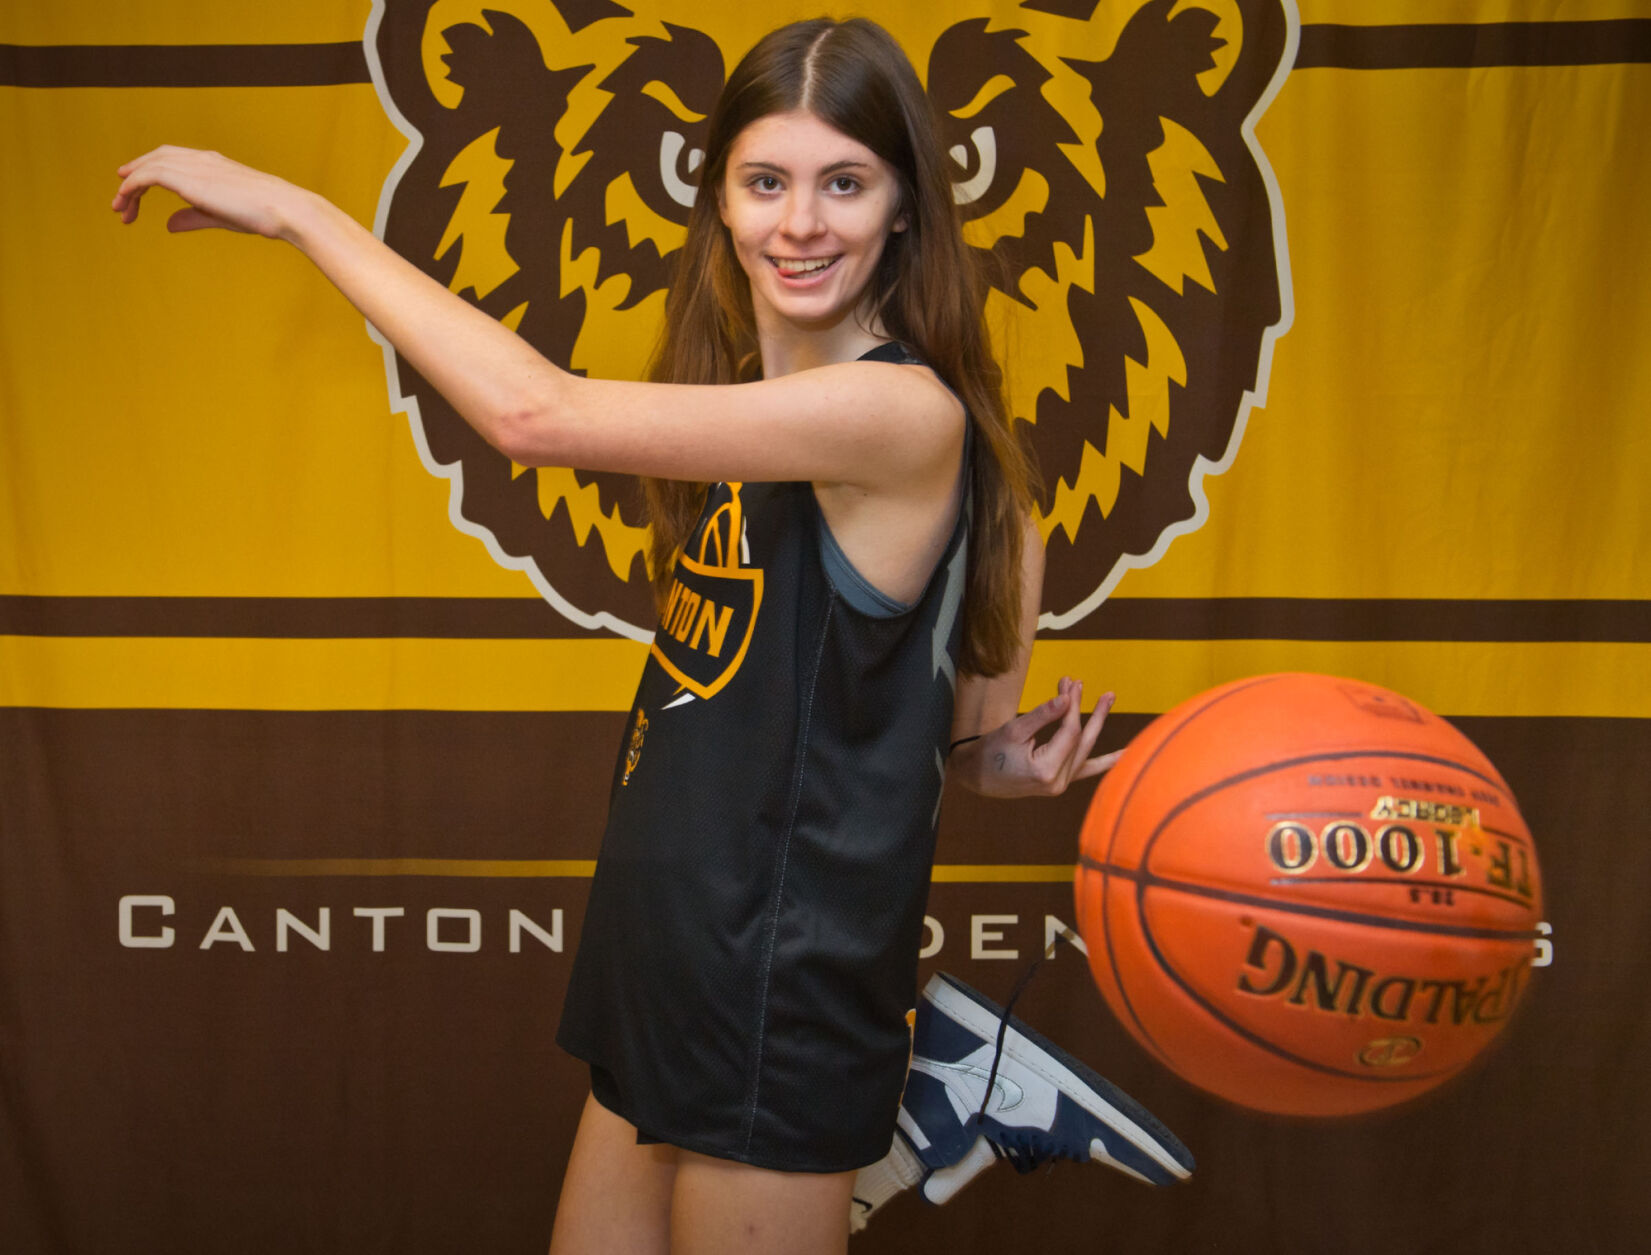 High school girls basketball Hoy carries on Golden Bears tradition as emerging leader in the NAC High School Sports nny360 image